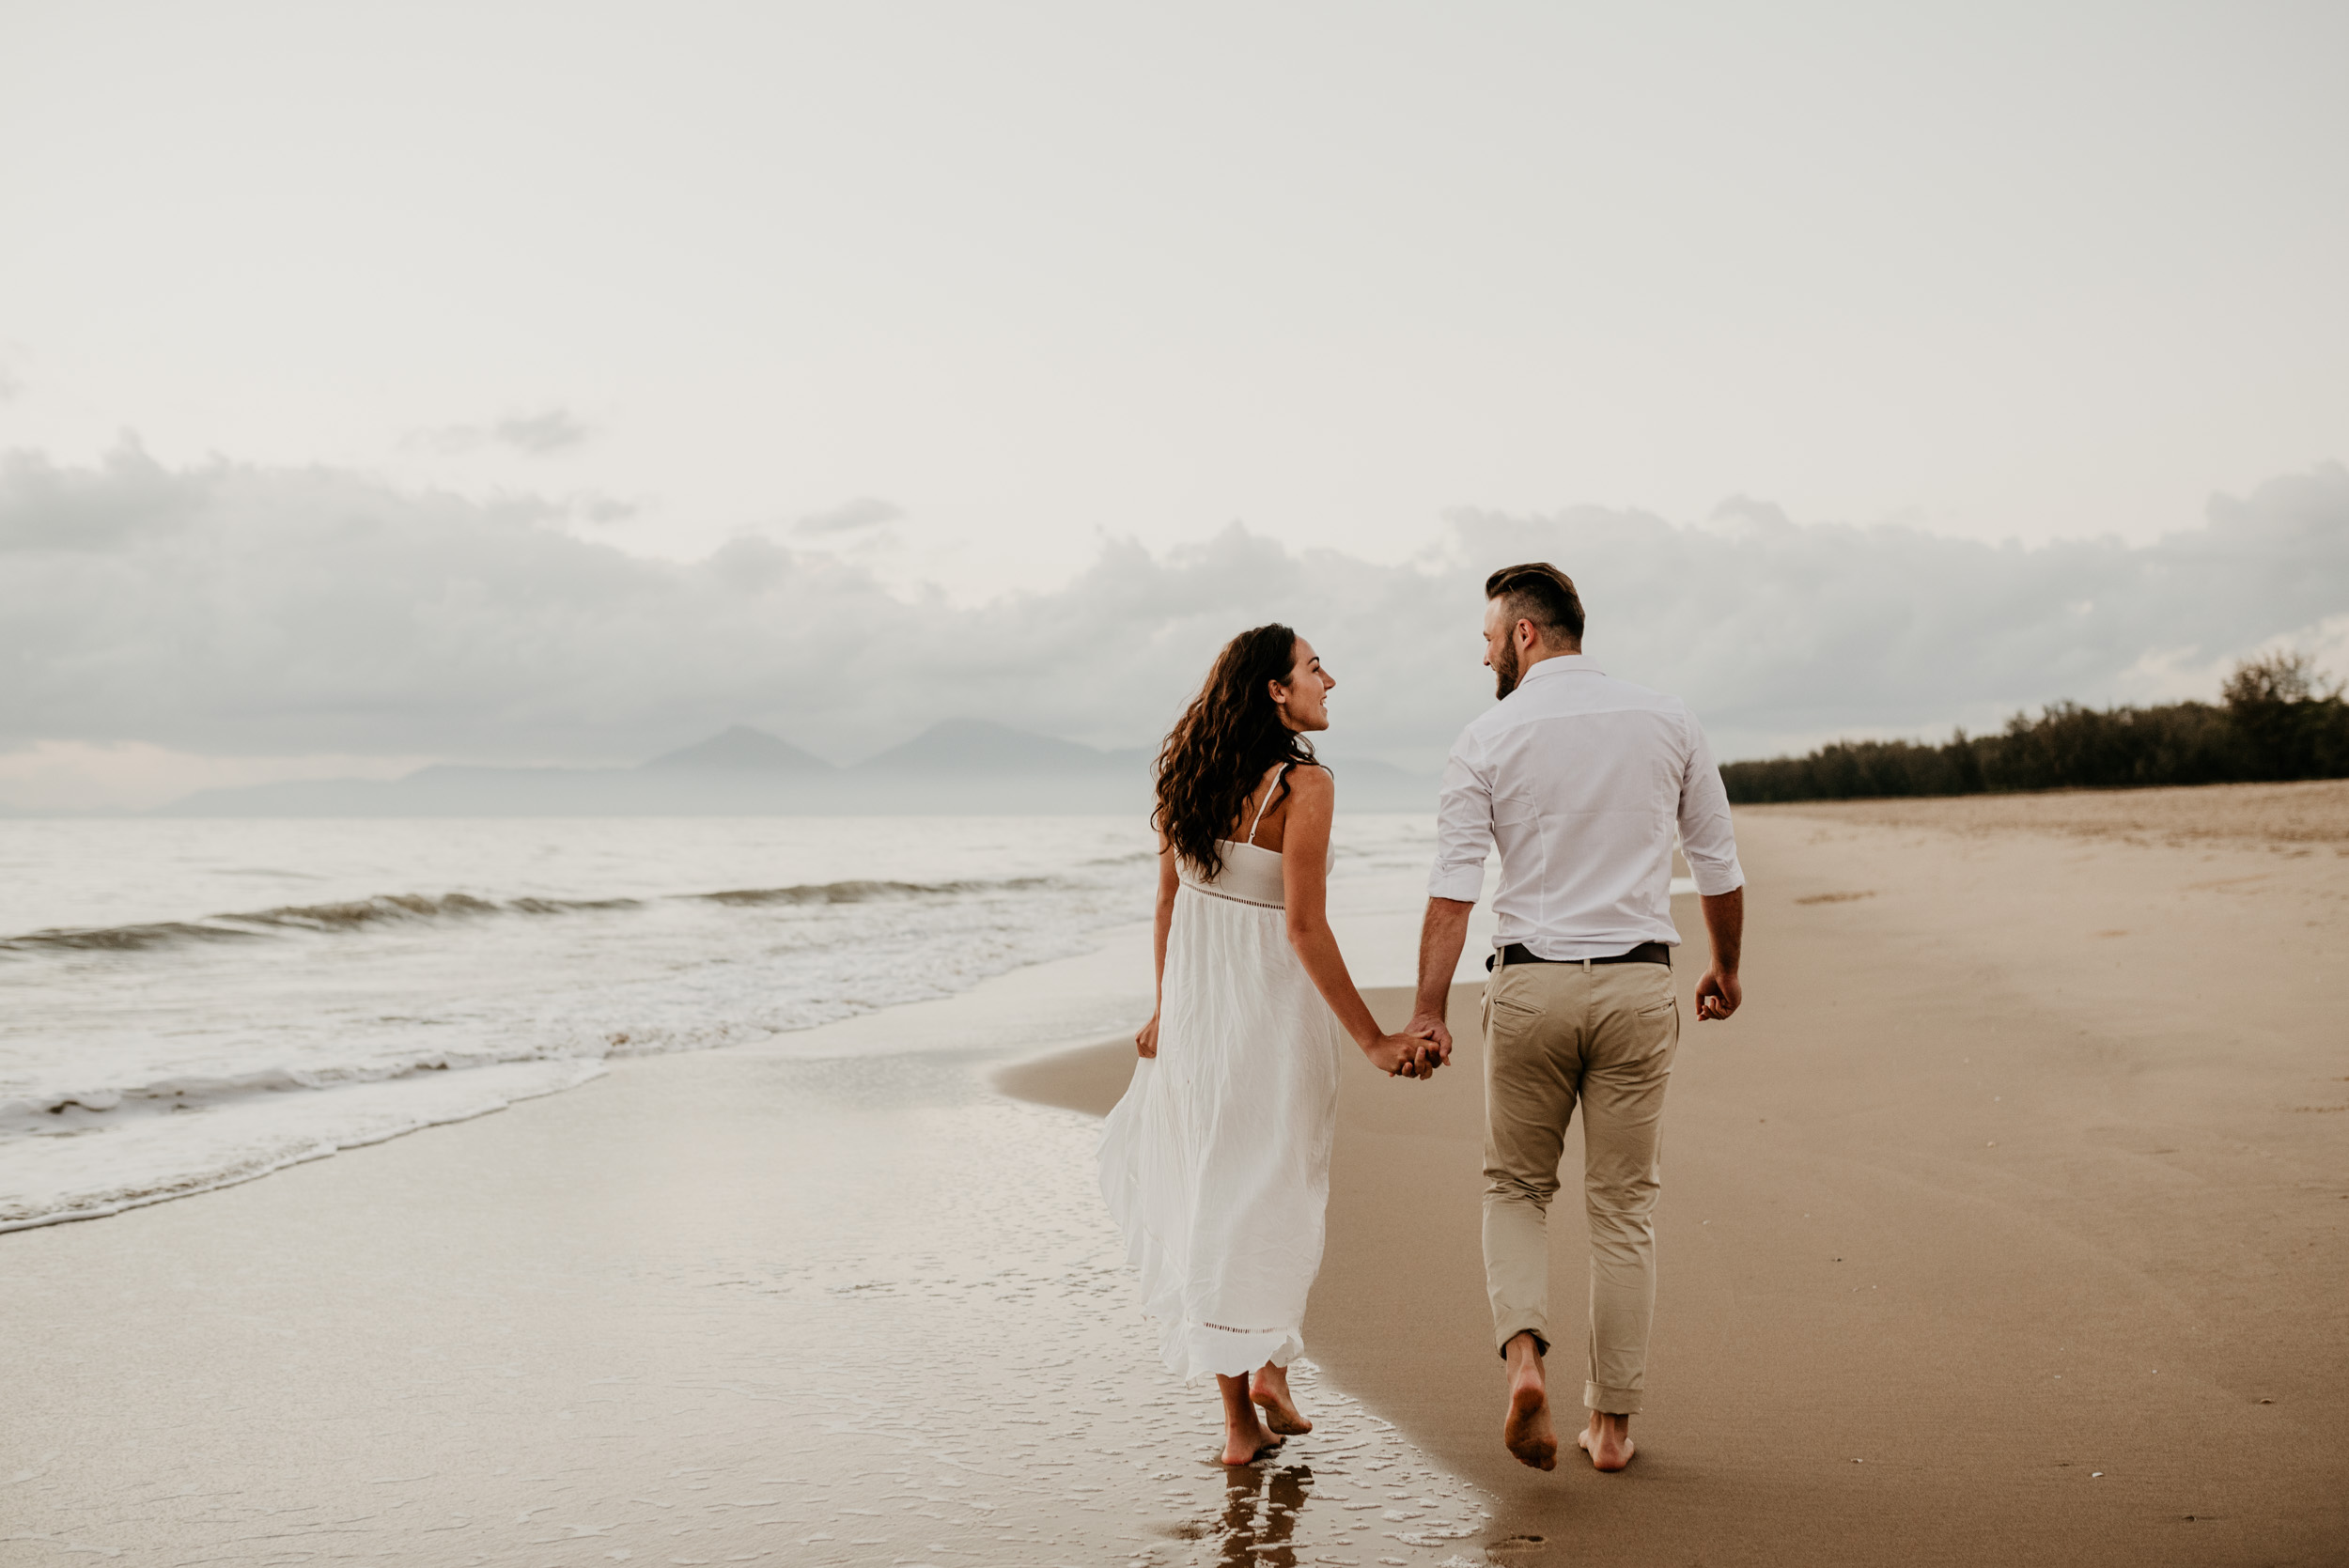 The Raw Photographer - Cairns Wedding Photographer - Engaged Engagement - Beach location - Candid Photography Queensland-2.jpg